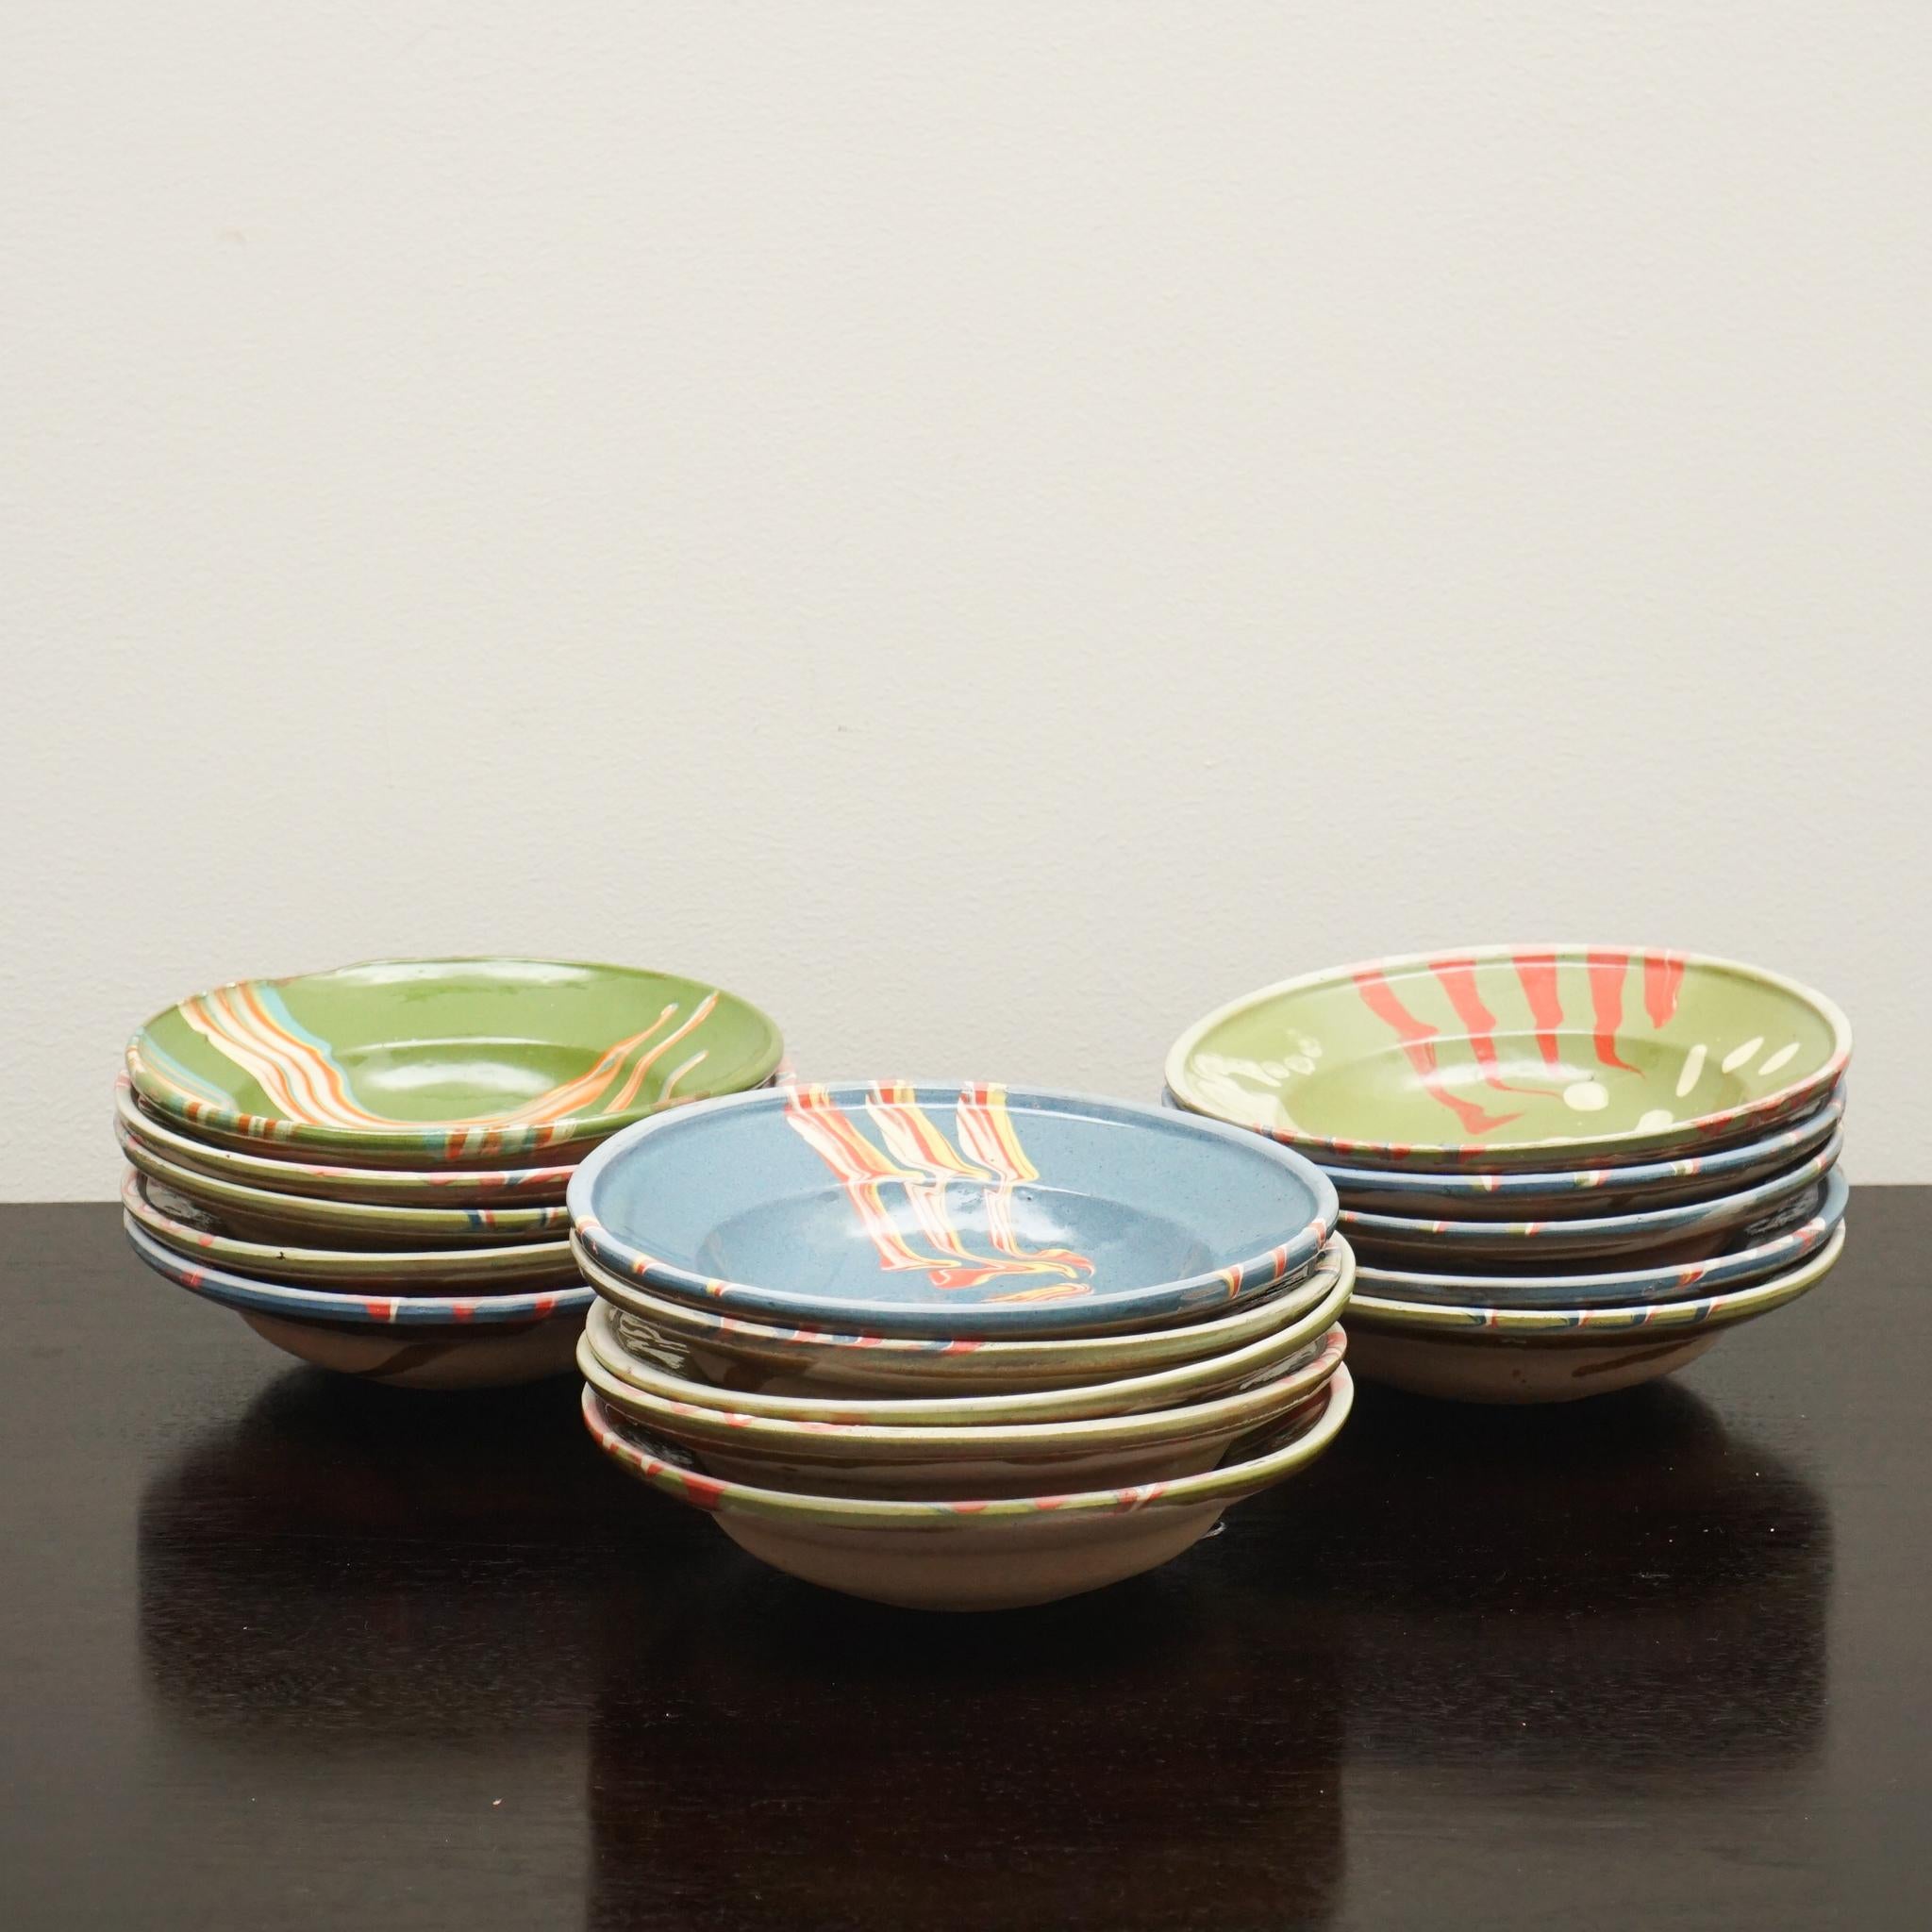 These delightful decorative clay bowls were discovered on a recent buying trip in France.  The bowls are hand-glazed in a variety of colorful patterns on a ground color of either green or blue.  There are fifteen bowls to choose from and many have